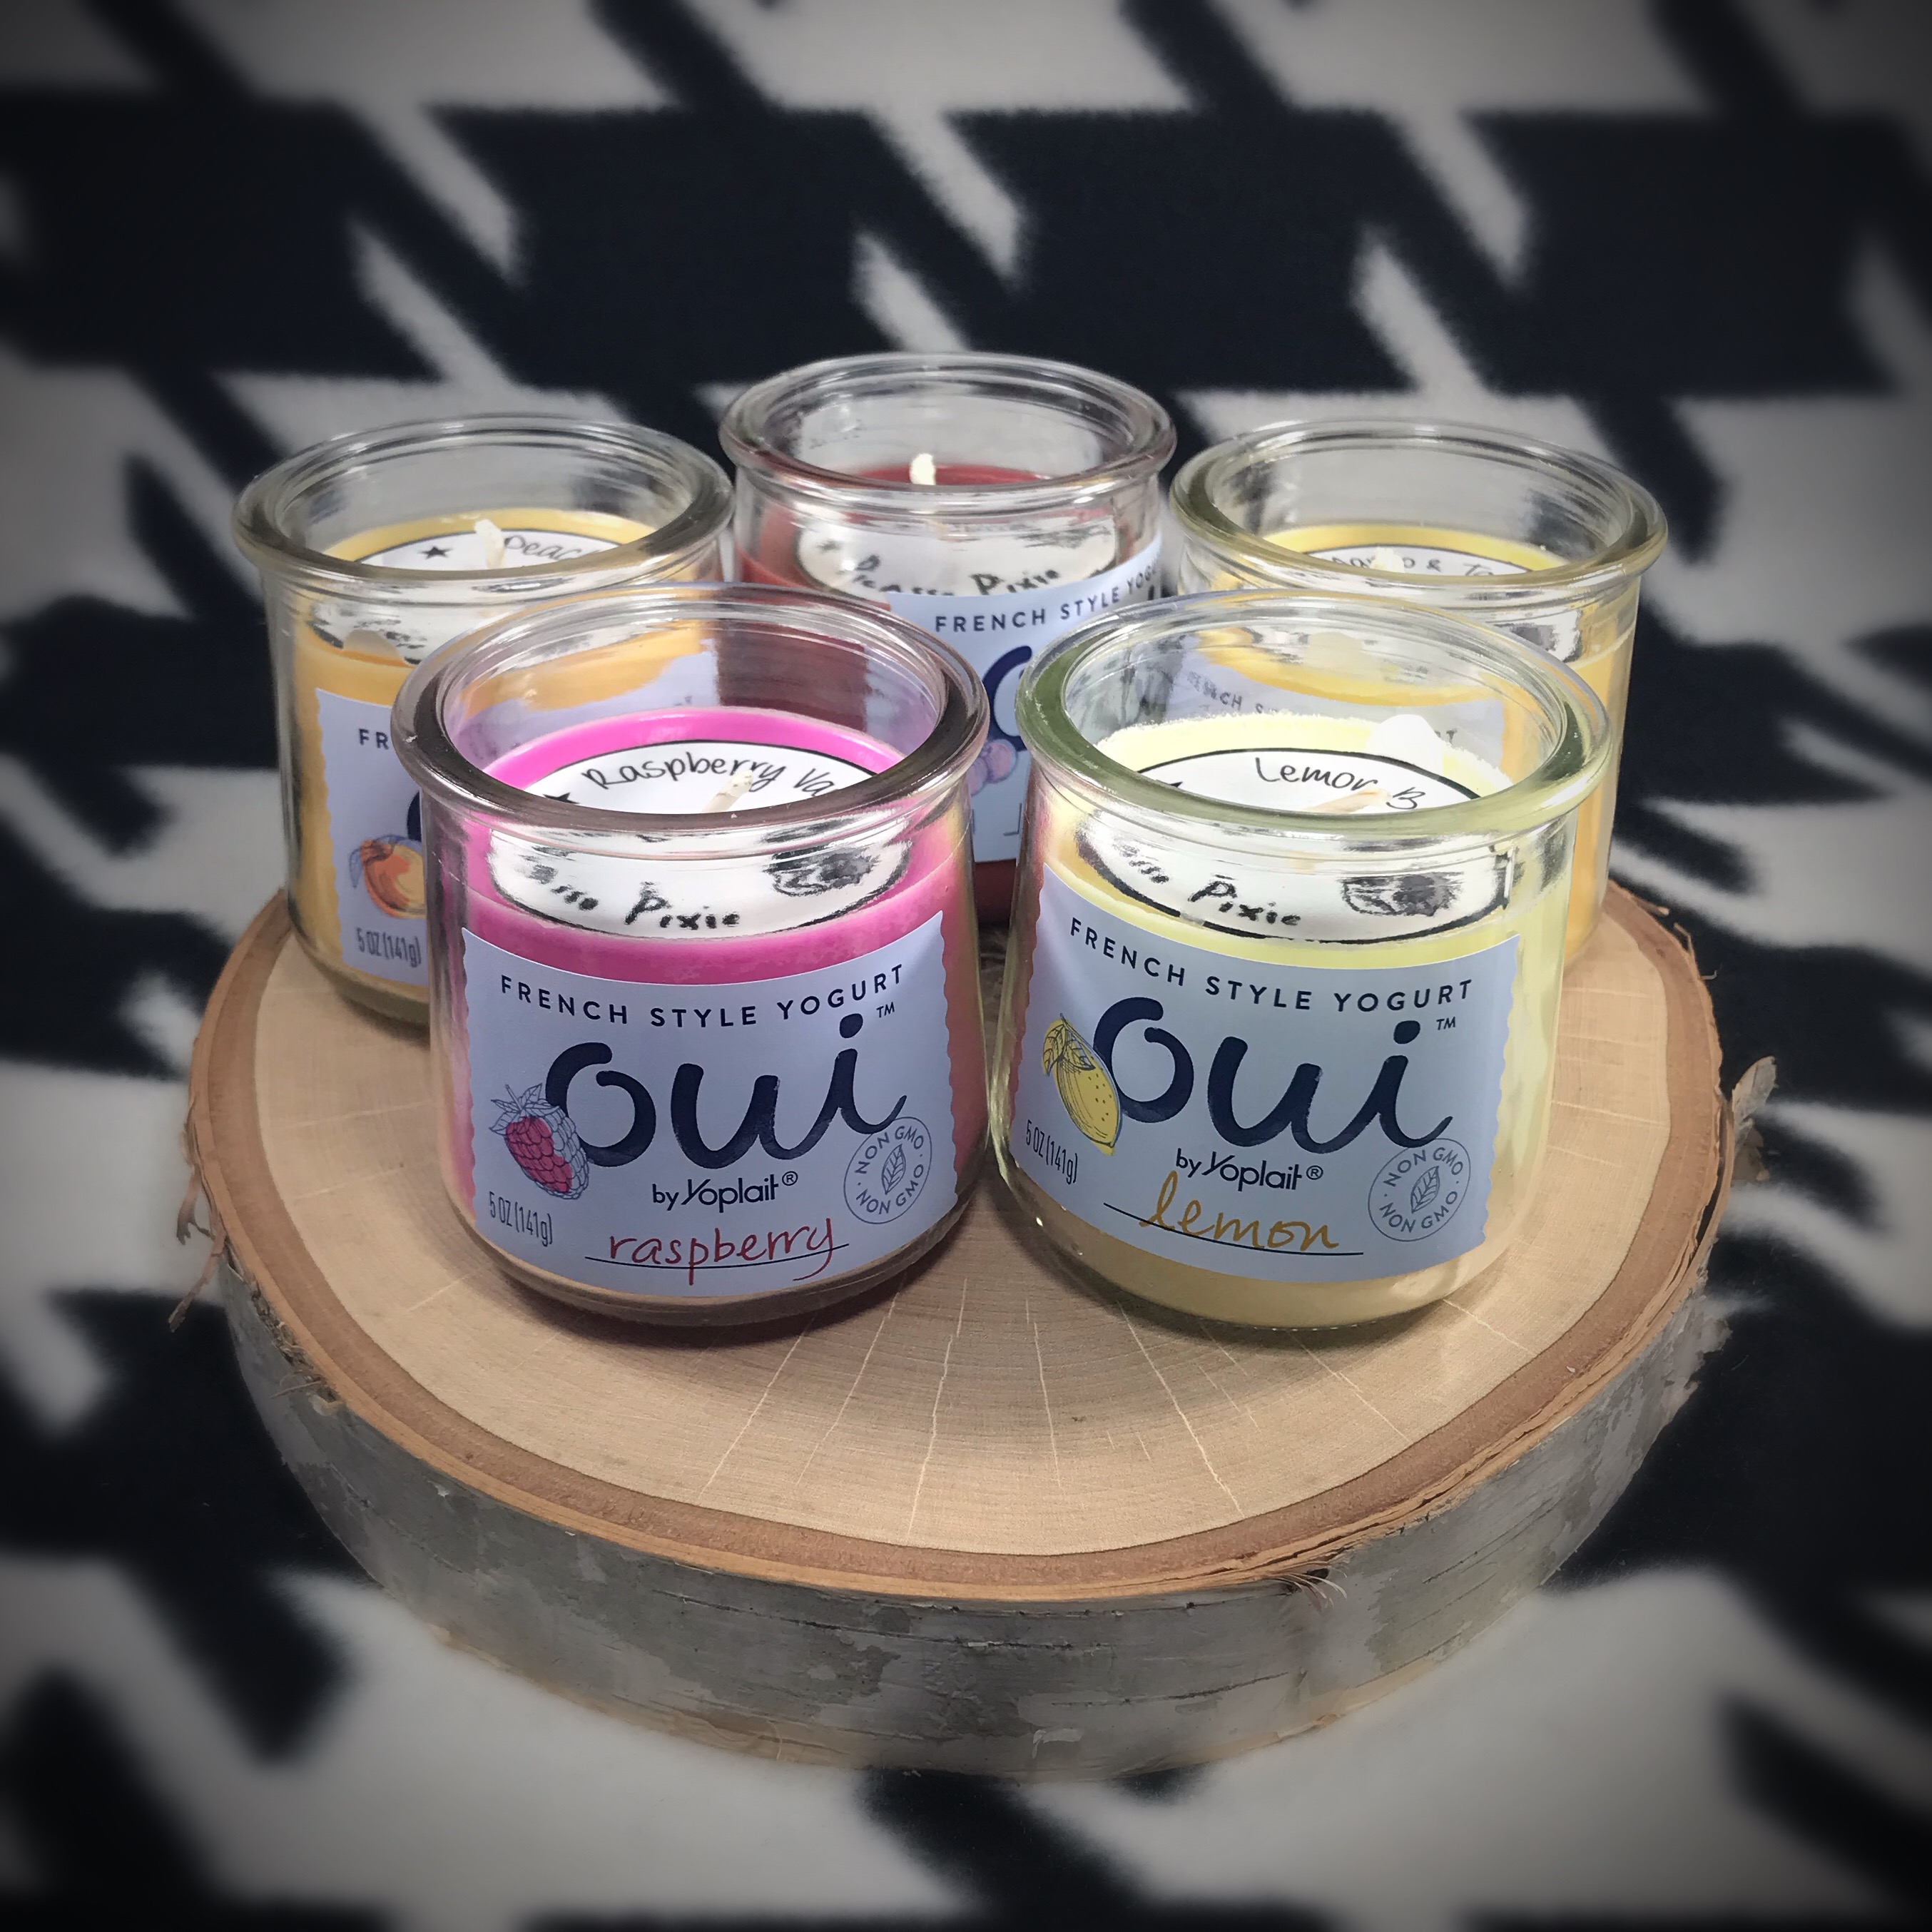 https://www.picassopixie.com/wp-content/uploads/2019/03/oui-yogurt-scented-soy-candle.jpg